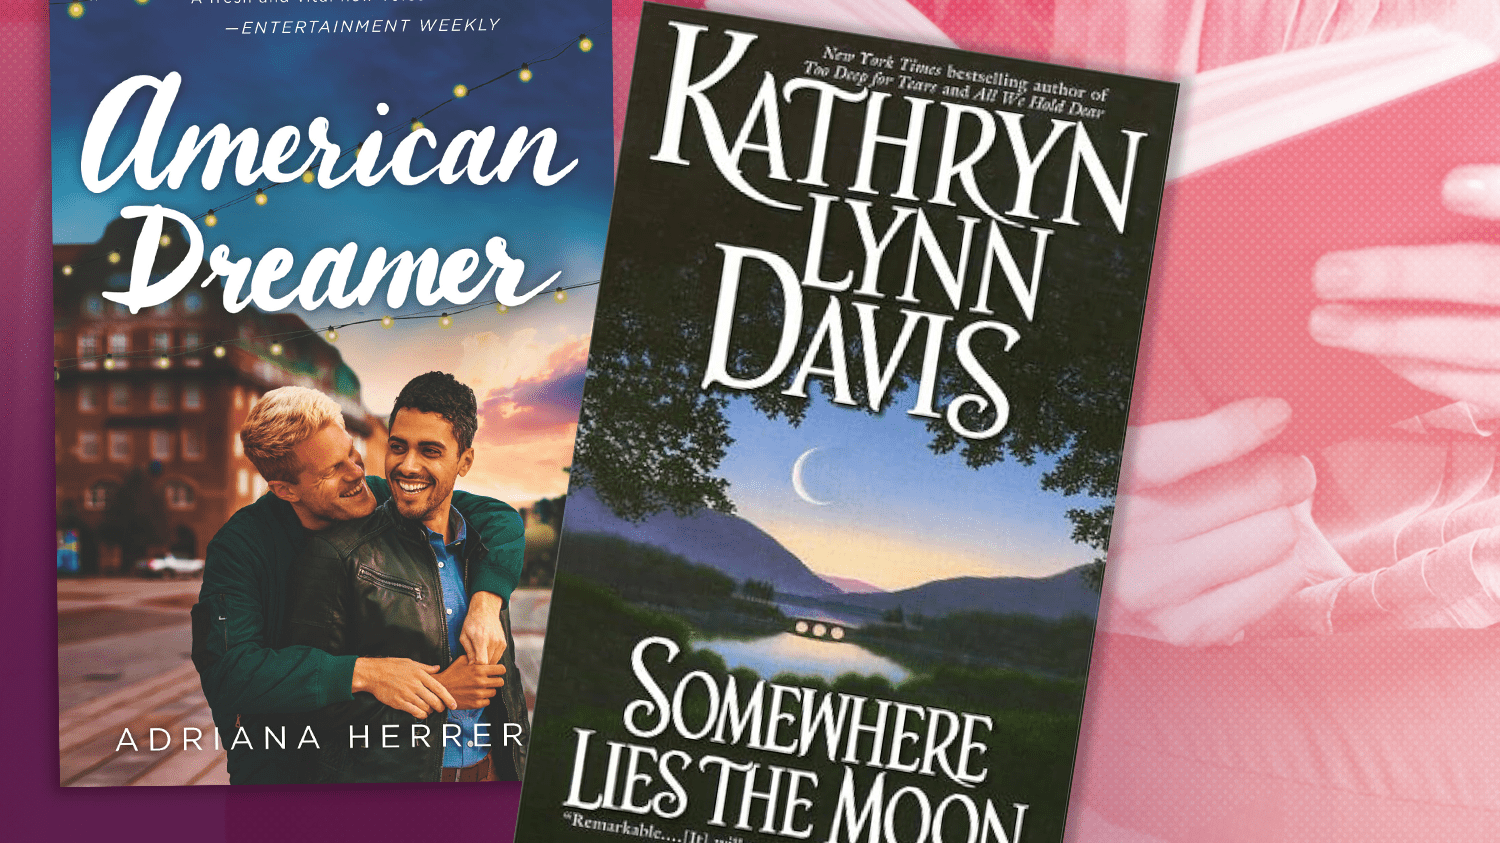 Bodice-ripping to bankruptcy: Kathryn Lynn Davis was accused of writing a “f***ing racist mess” as the literary market turns towards the voices of ethnic and sexual minorities